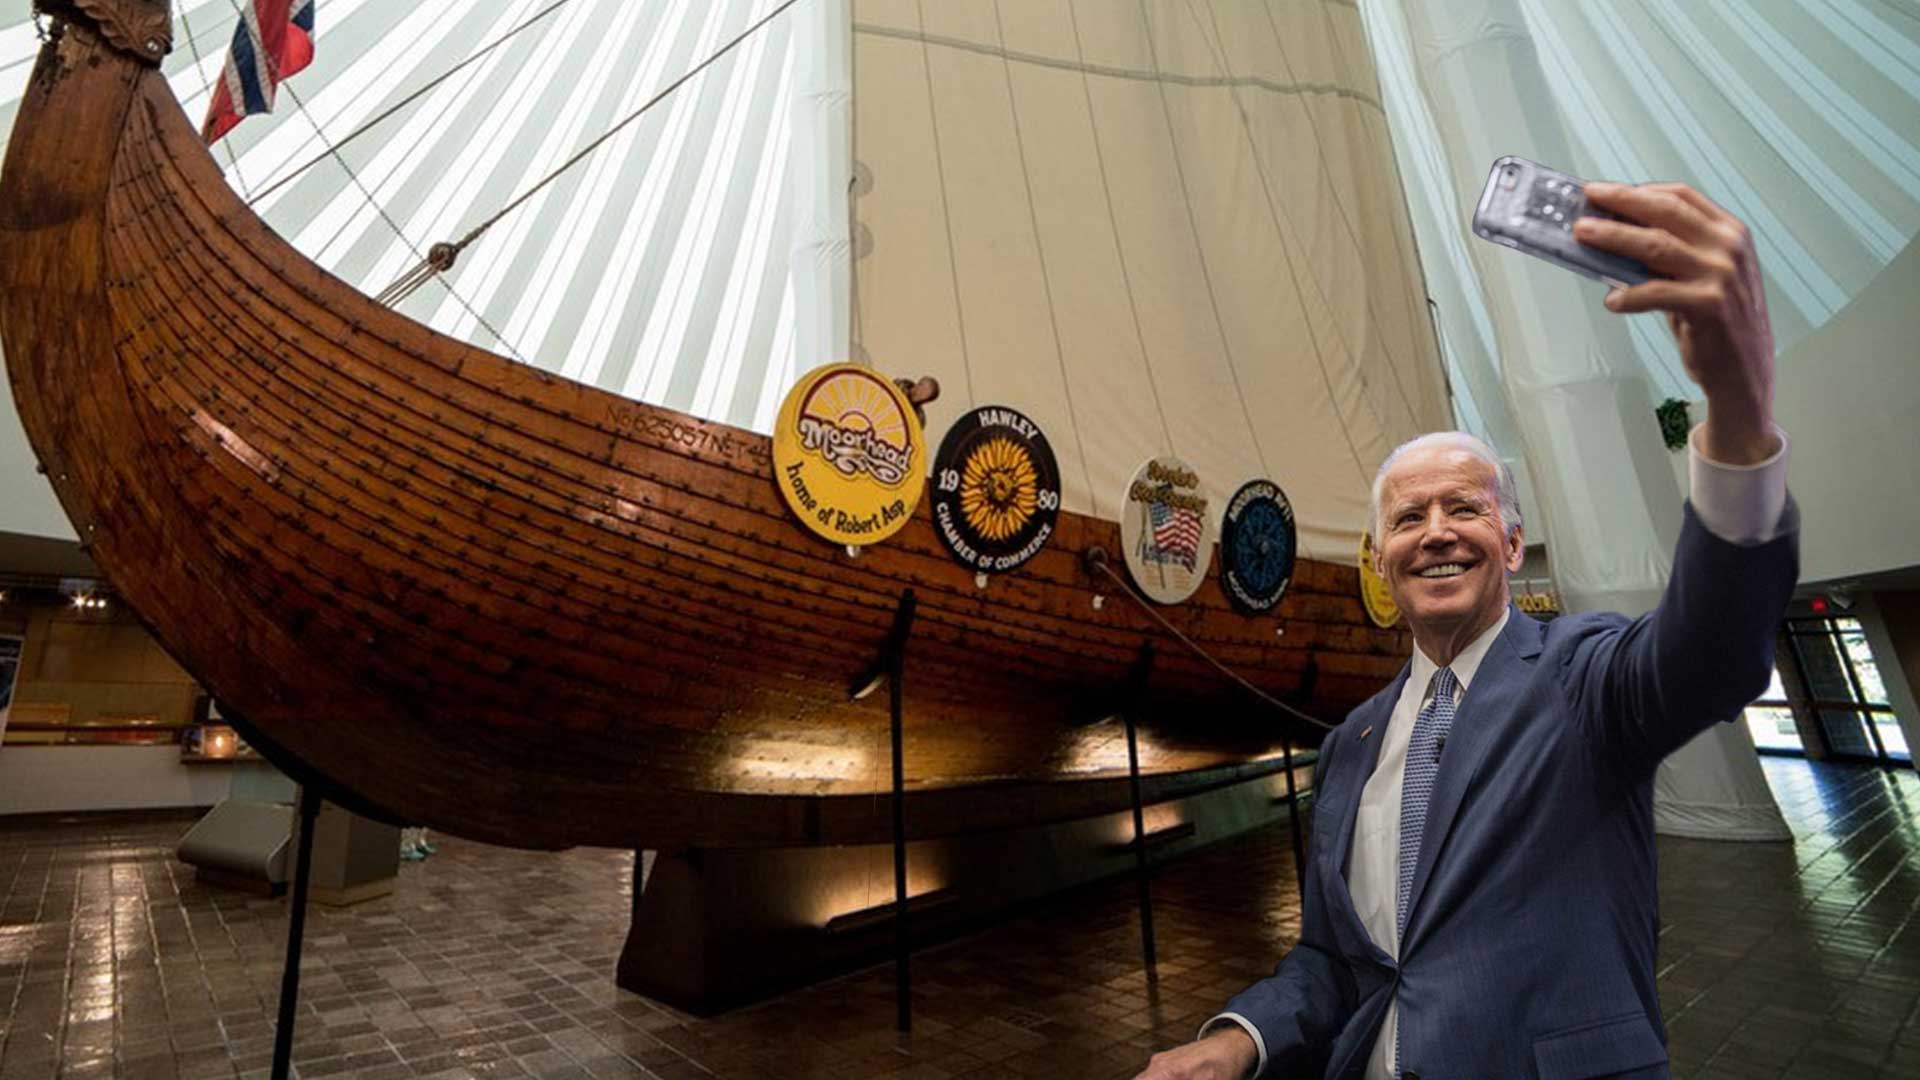 Biden-Reveals-Trip-to-Fargo-Moorhead-Was-to-Only-to-Get-Sick-Selfie-In-Front-of-the-Hjemkomst-Viking-Ship.jpg